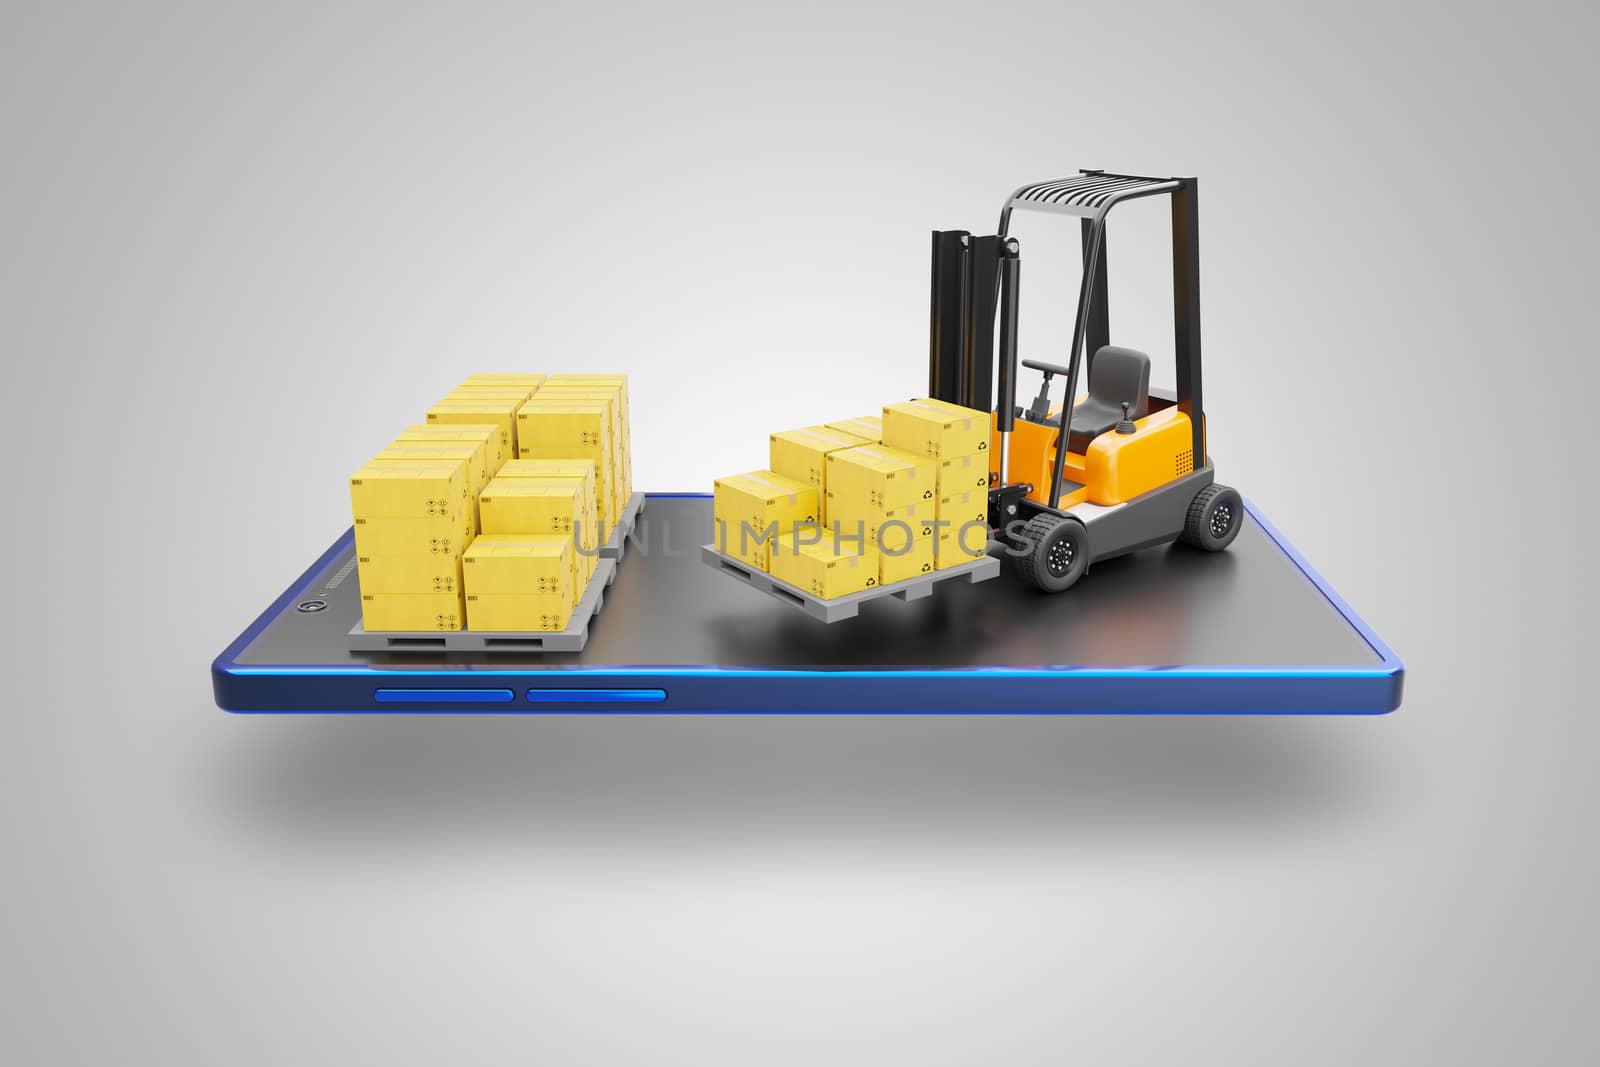 Forklift truck and cardboard box on pallet set on screen of smartphone. Cargo in warehouse to prepare for delivery by transporting to destination. Concept of online shopping and logistics. 3D render.